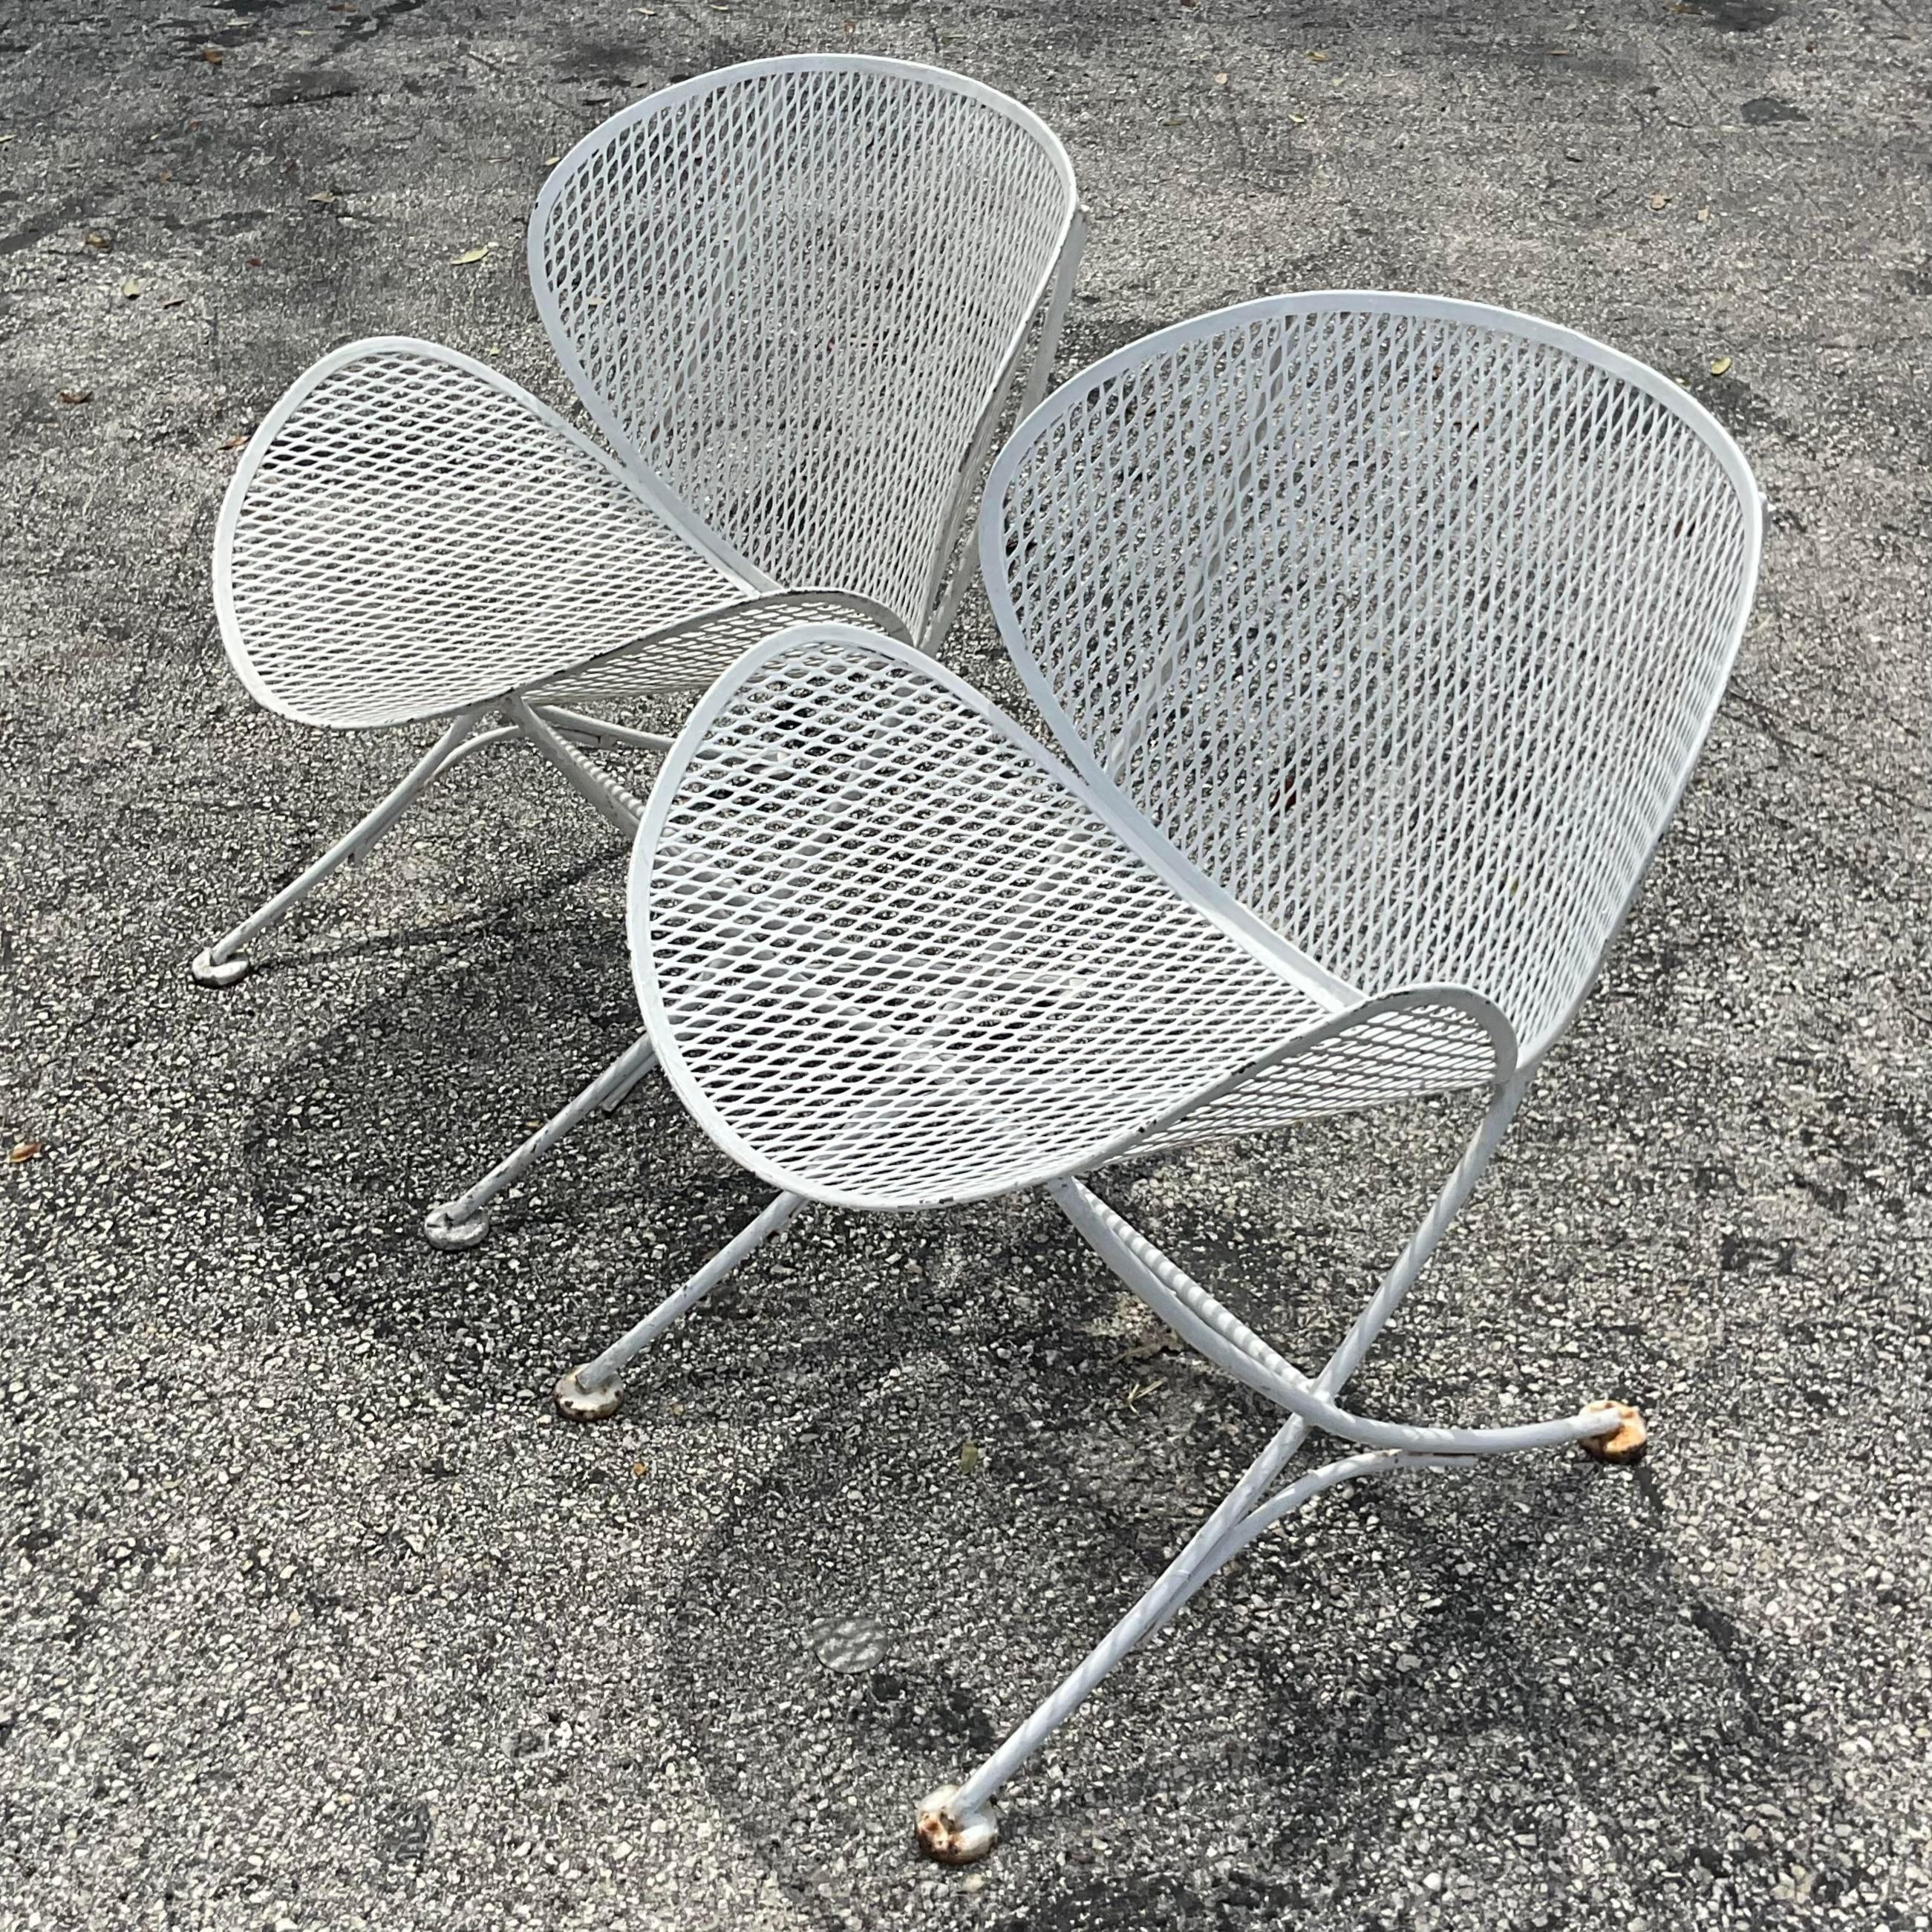 A fabulous pair of vintage MCM lounge chairs. Made by the iconic Salterini group. Unmarked. Thr classic Orange Slice design in a patinated white finish. Acquired from a Palm Beach estate.

Seat height 13.5